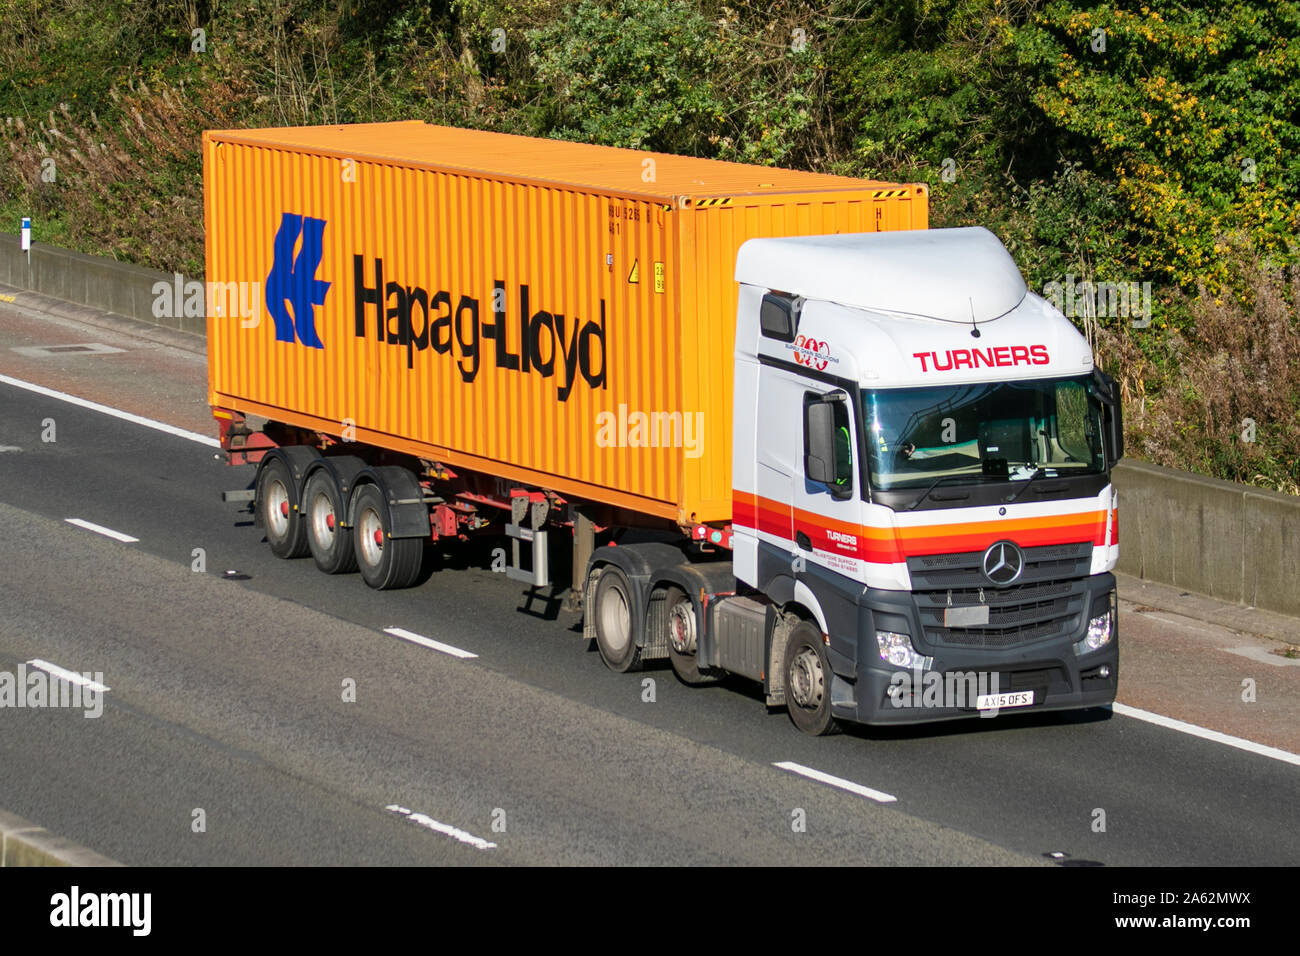 Turners Haulage delivery trucks, lorry, Hapag-Lloyd transportation, truck, cargo, Mercedes Benz vehicle, delivery, commercial transport, industry, supply chain freight, on the M6 at Lancaster, UK Stock Photo